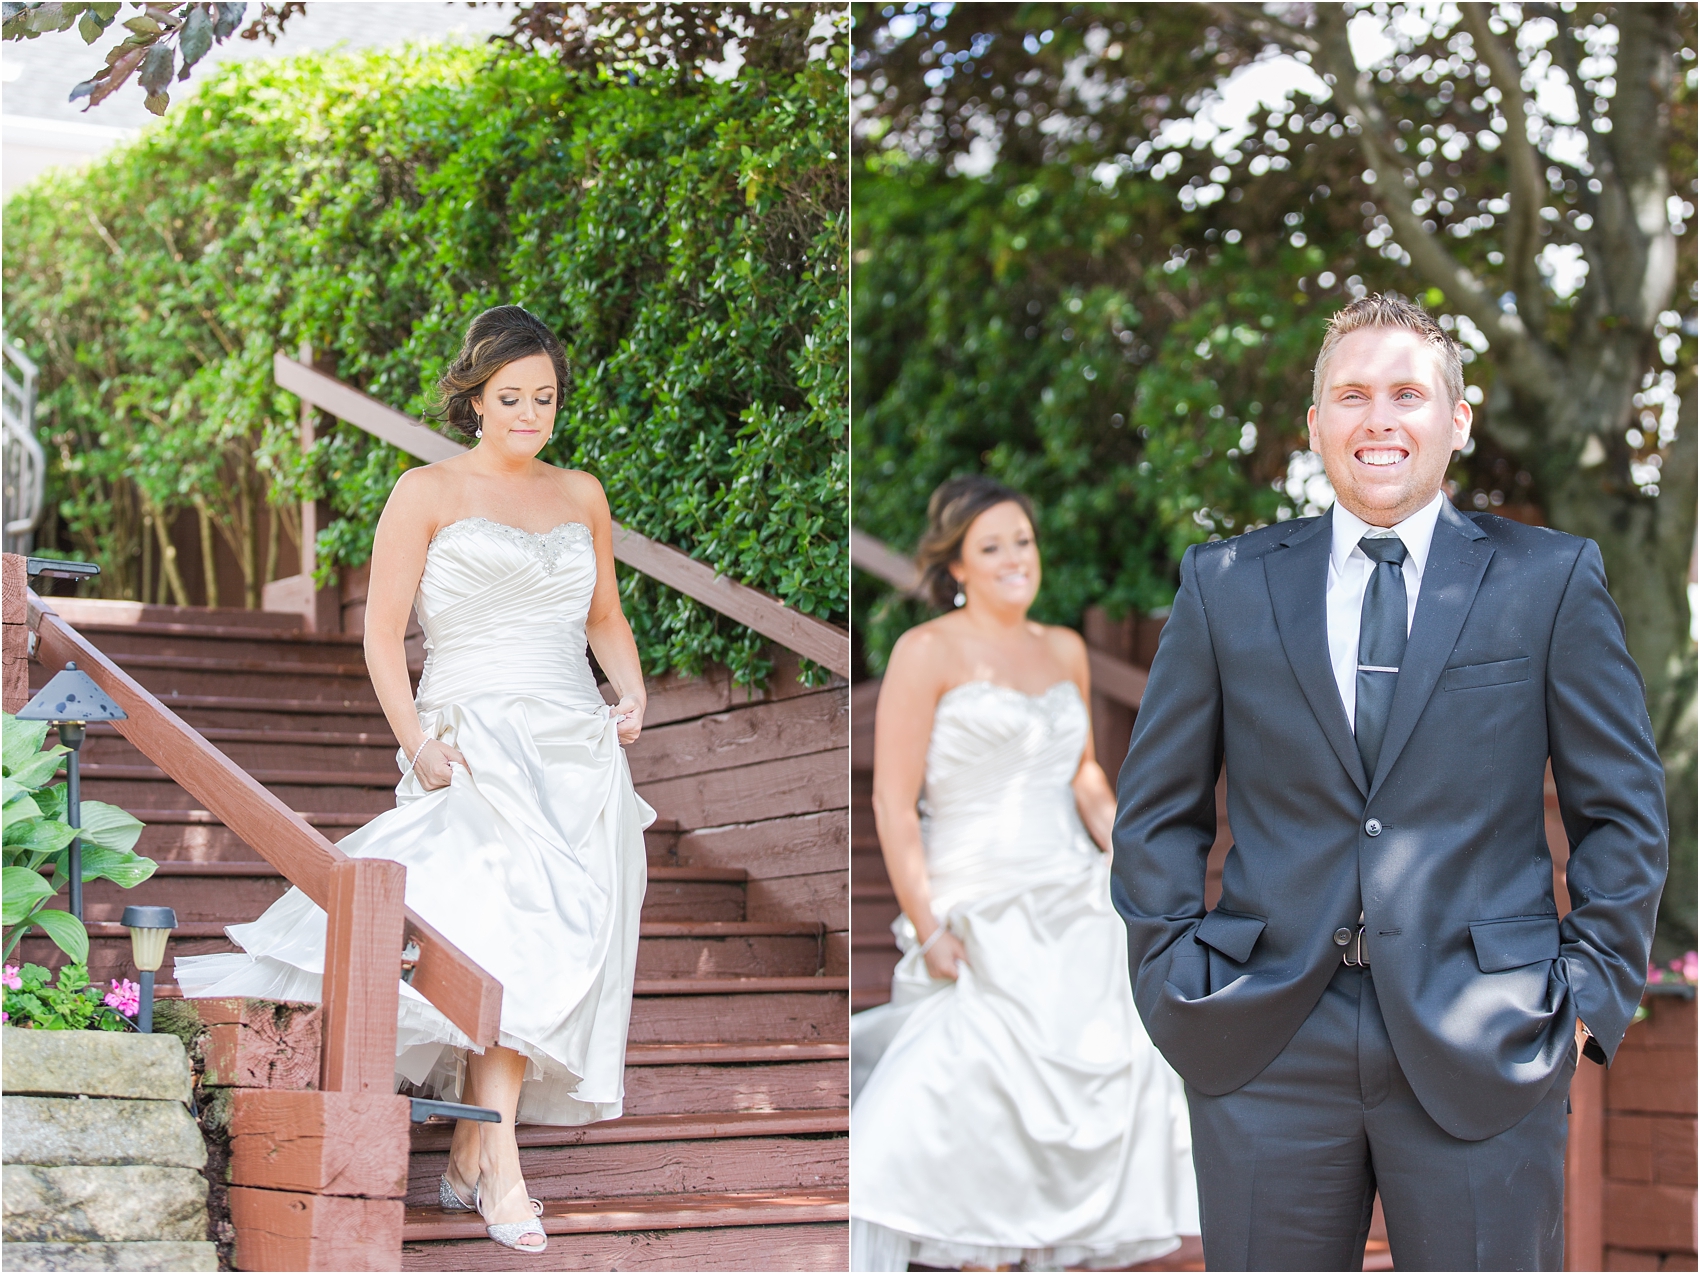 classic-wedding-photos-at-great-oaks-country-club-in-rochester-hills-mi-by-courtney-carolyn-photography_0027.jpg